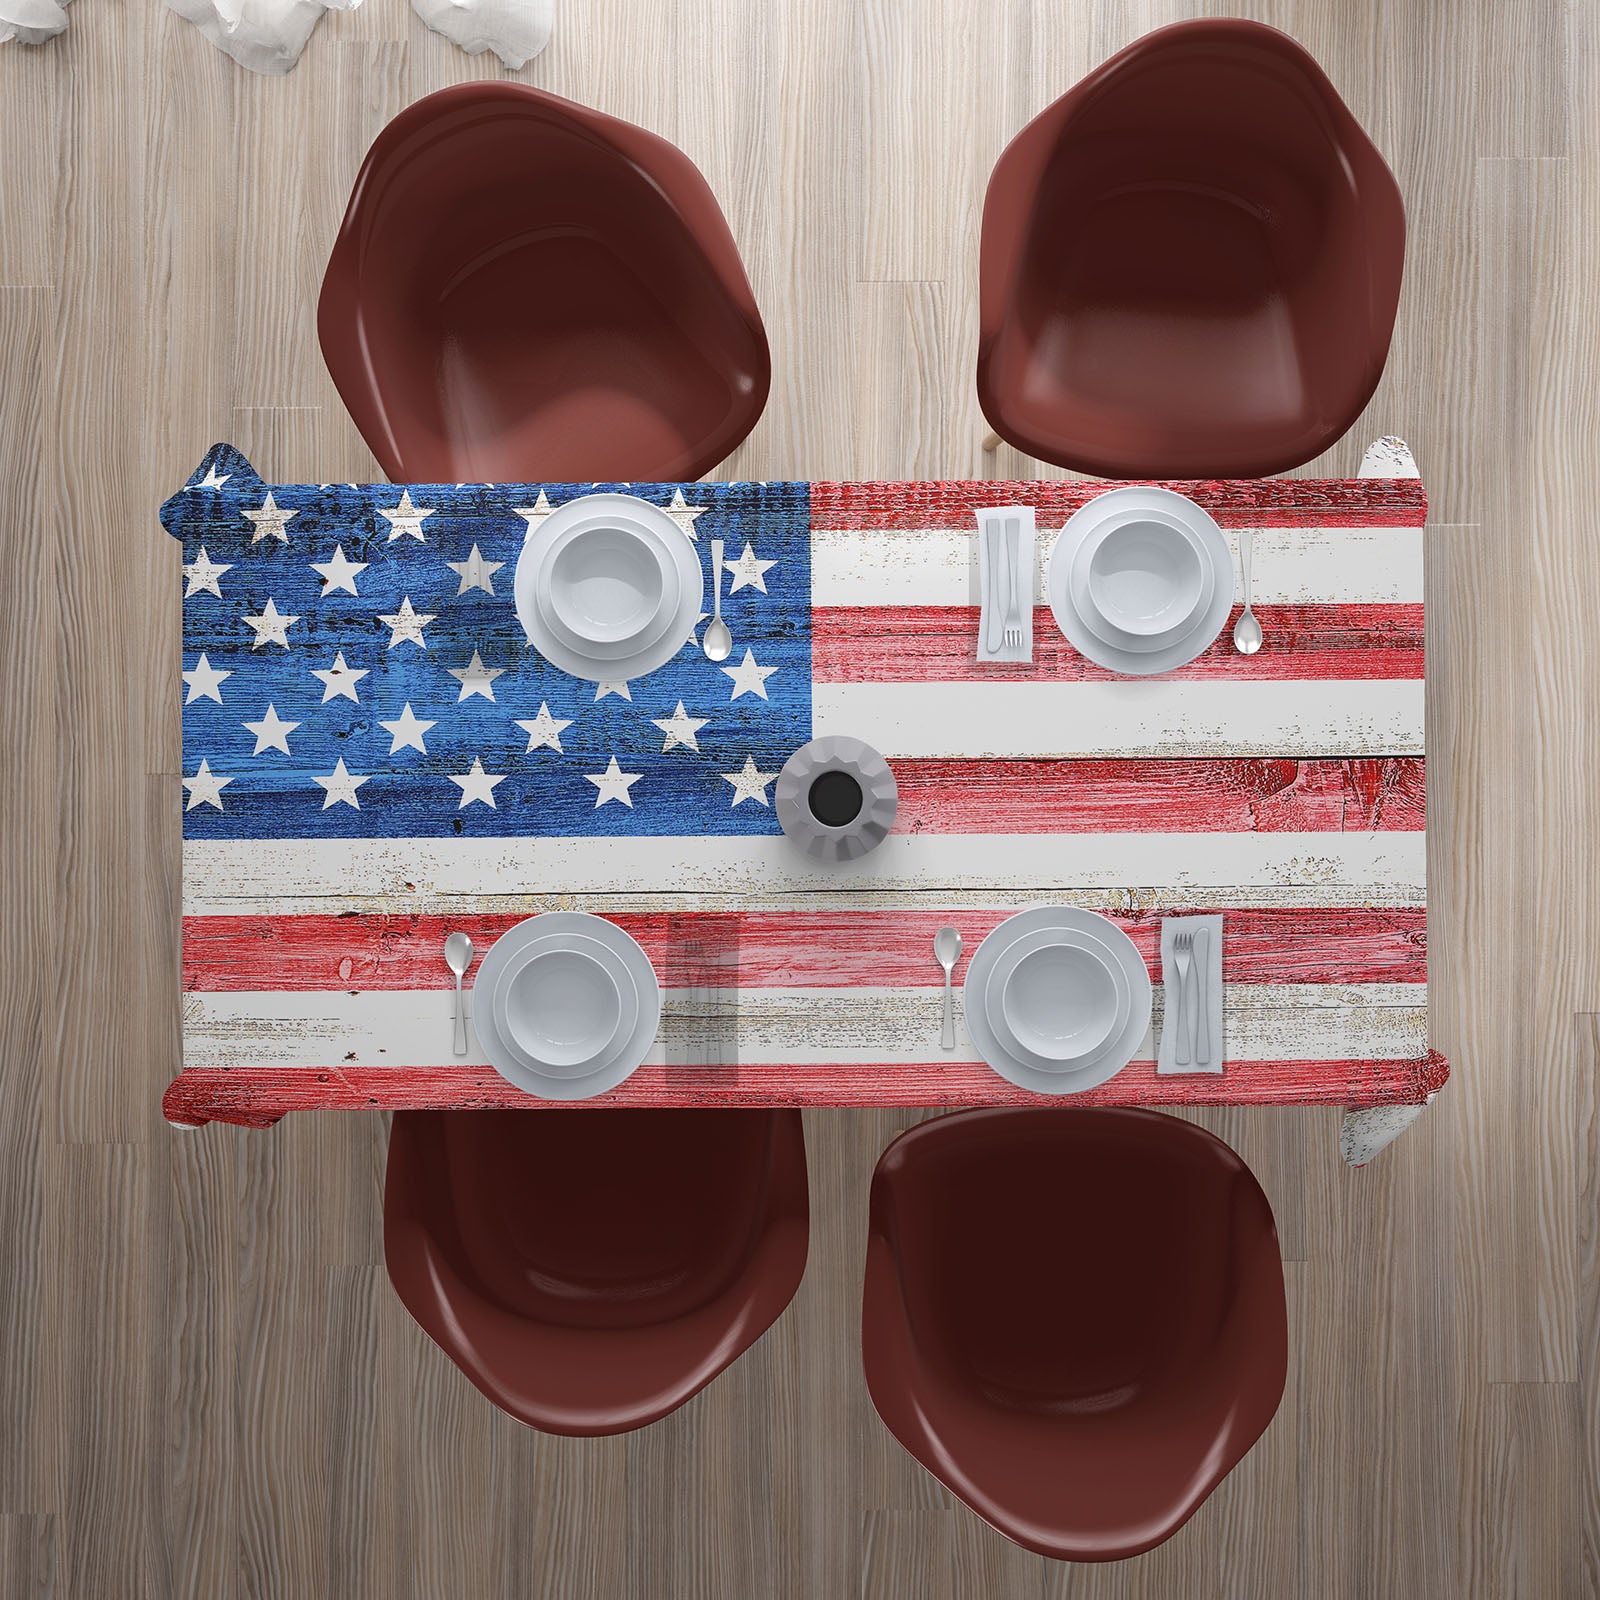 Tablecloth USA Flag on Wooden Planks